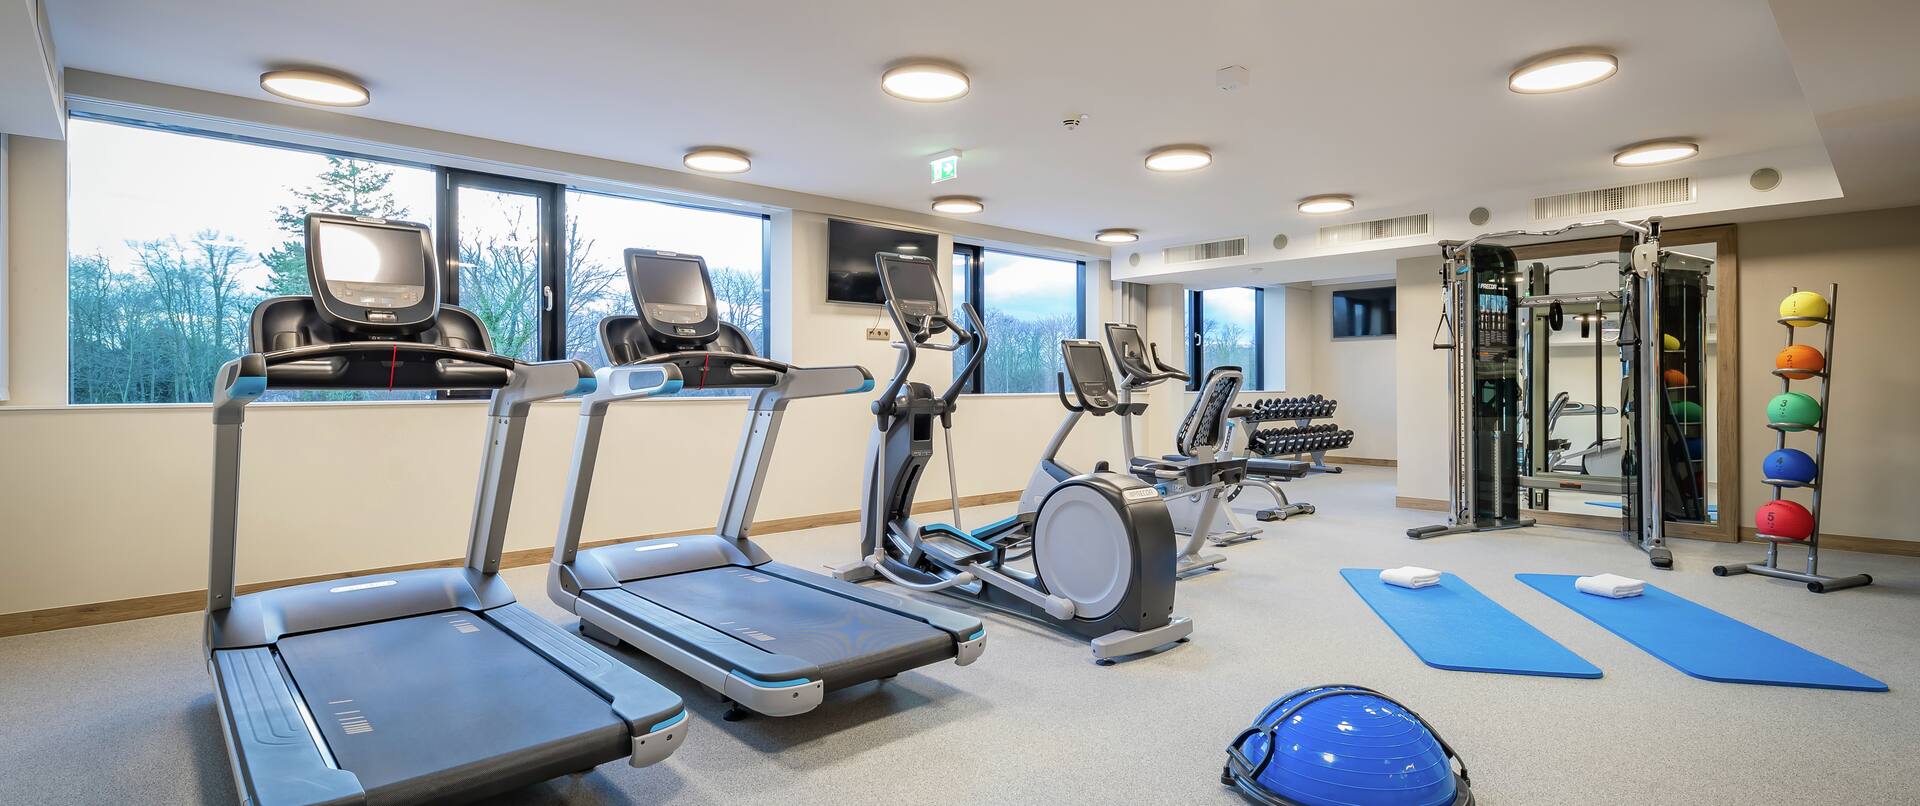 Fitness Center with Treadmills and Yoga Mats